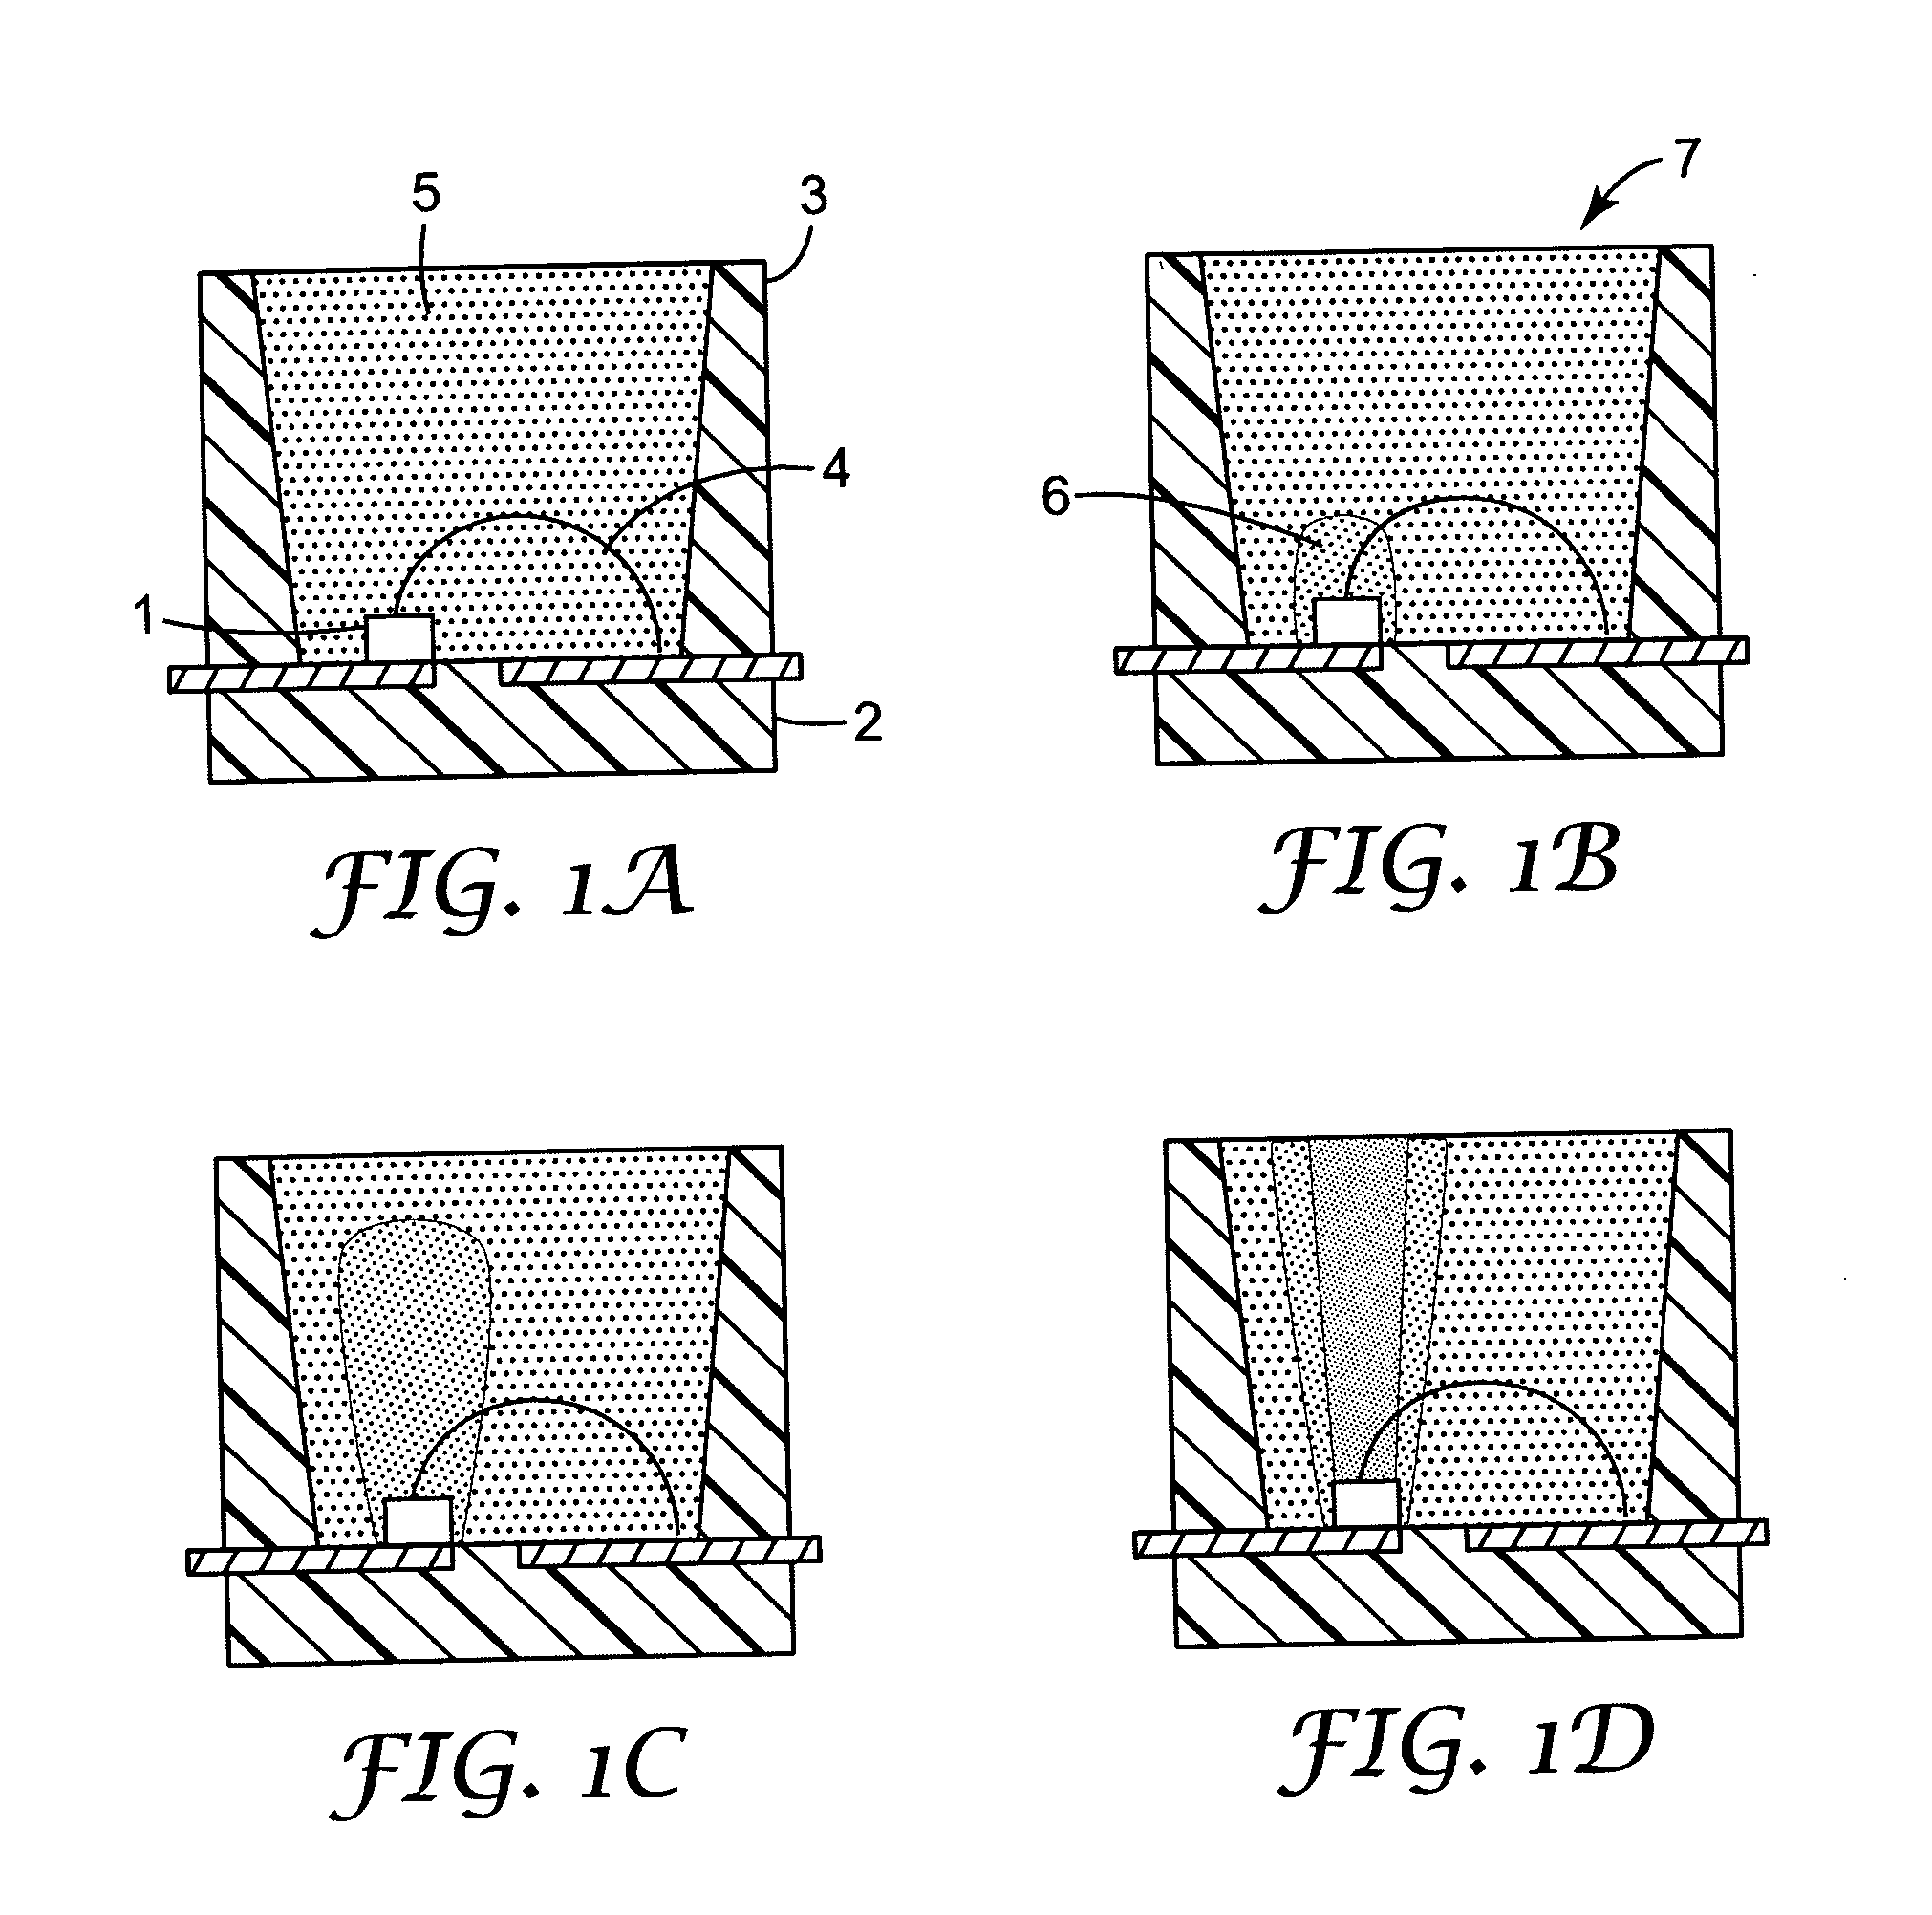 Encapsulated light emitting diodes and methods of making